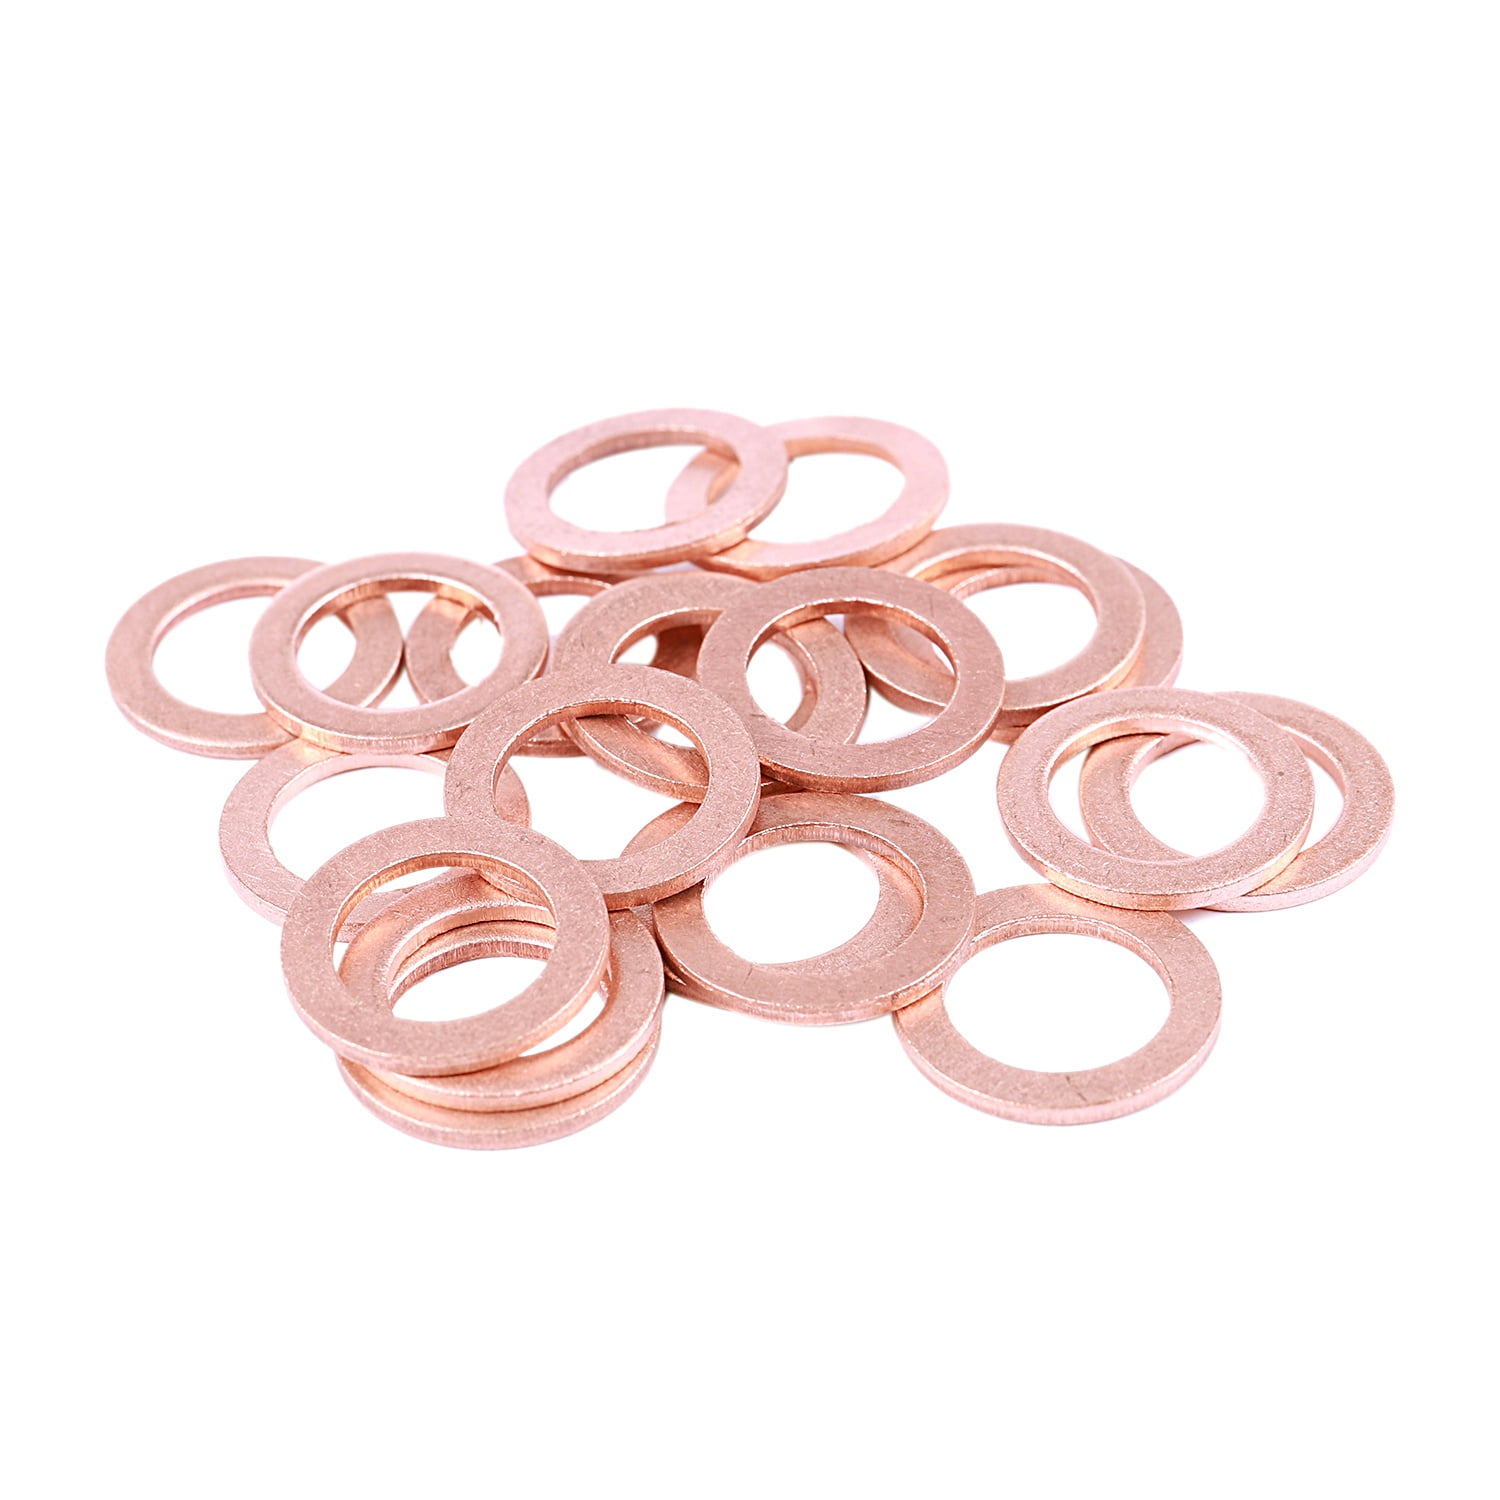 Pack of 10 Copper Washers 10mm x 14mm x 1.5mm 